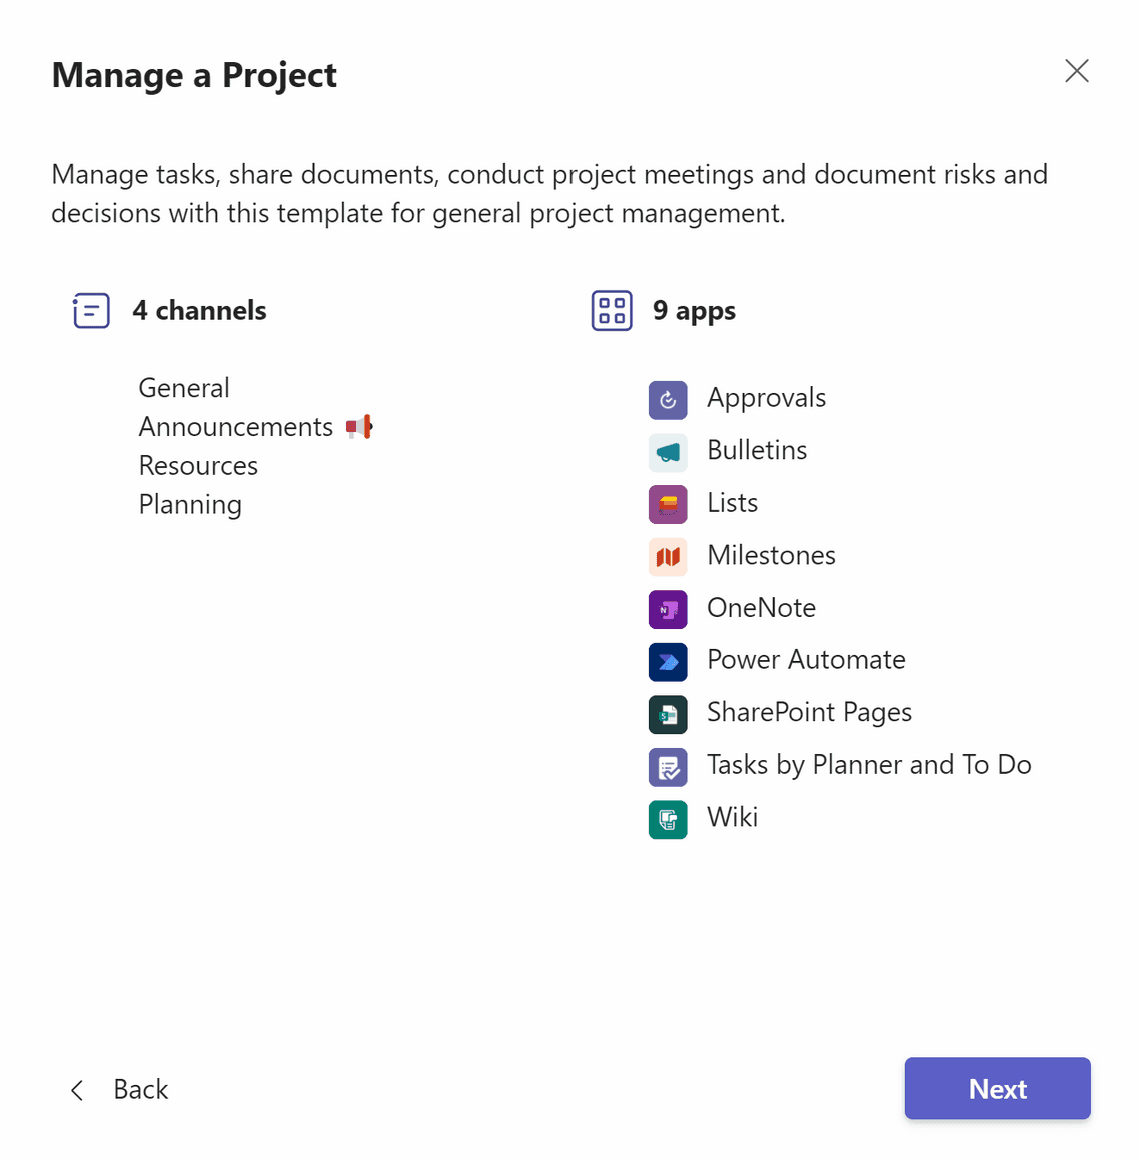 Manage a project template